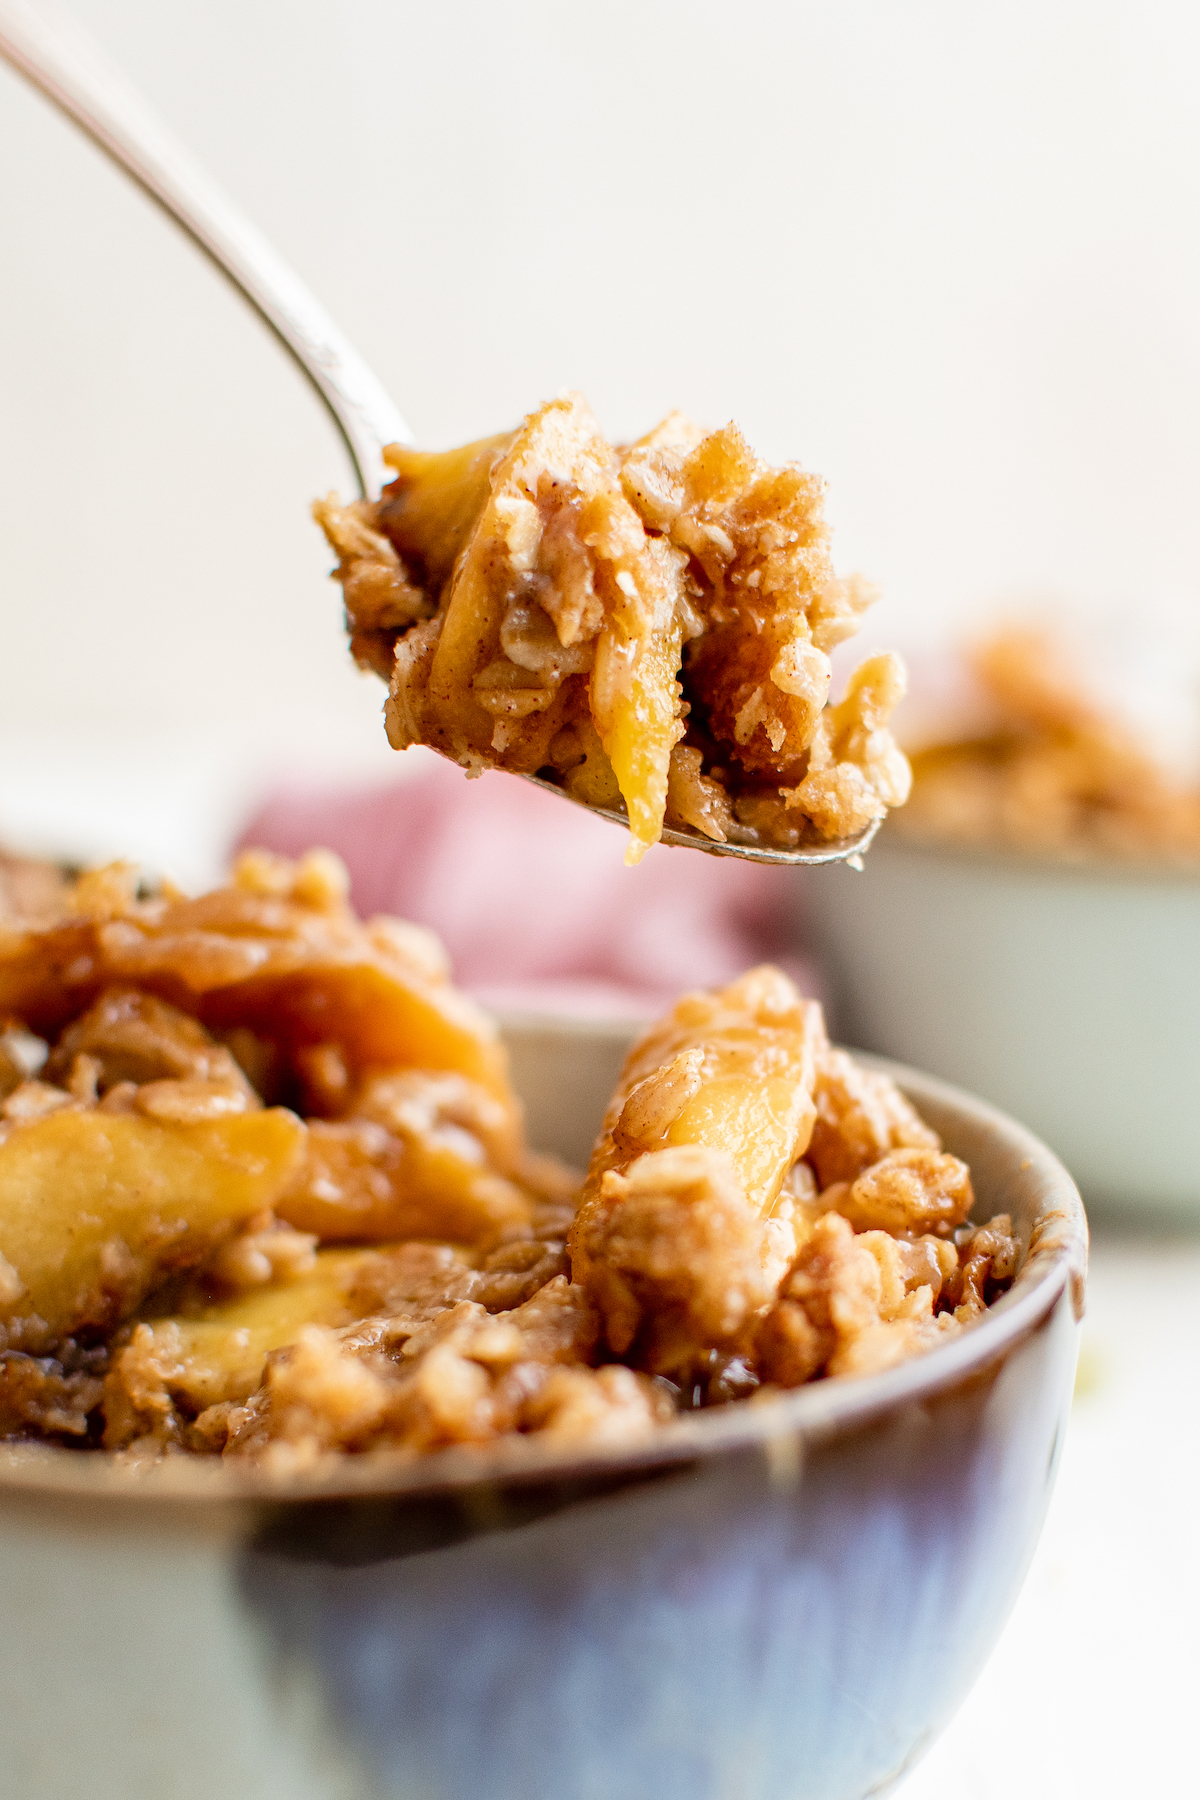 A spoonful of peach crisp being scooped up from a bowl.